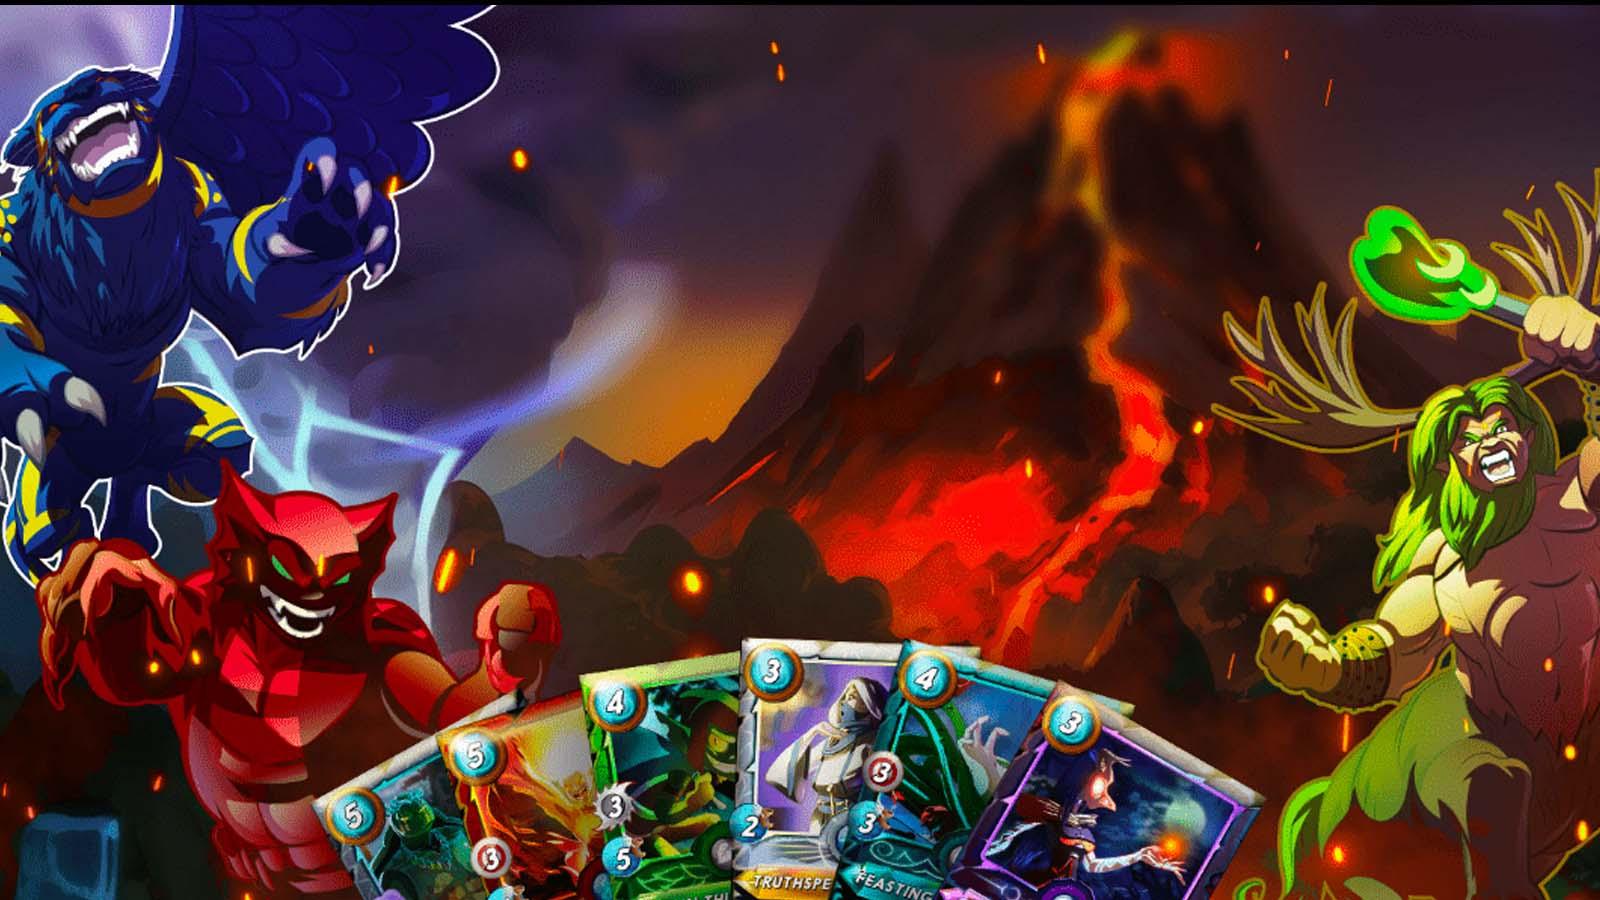 Splinterlands is an ever-expanding, fast-paced, metaverse trading card game